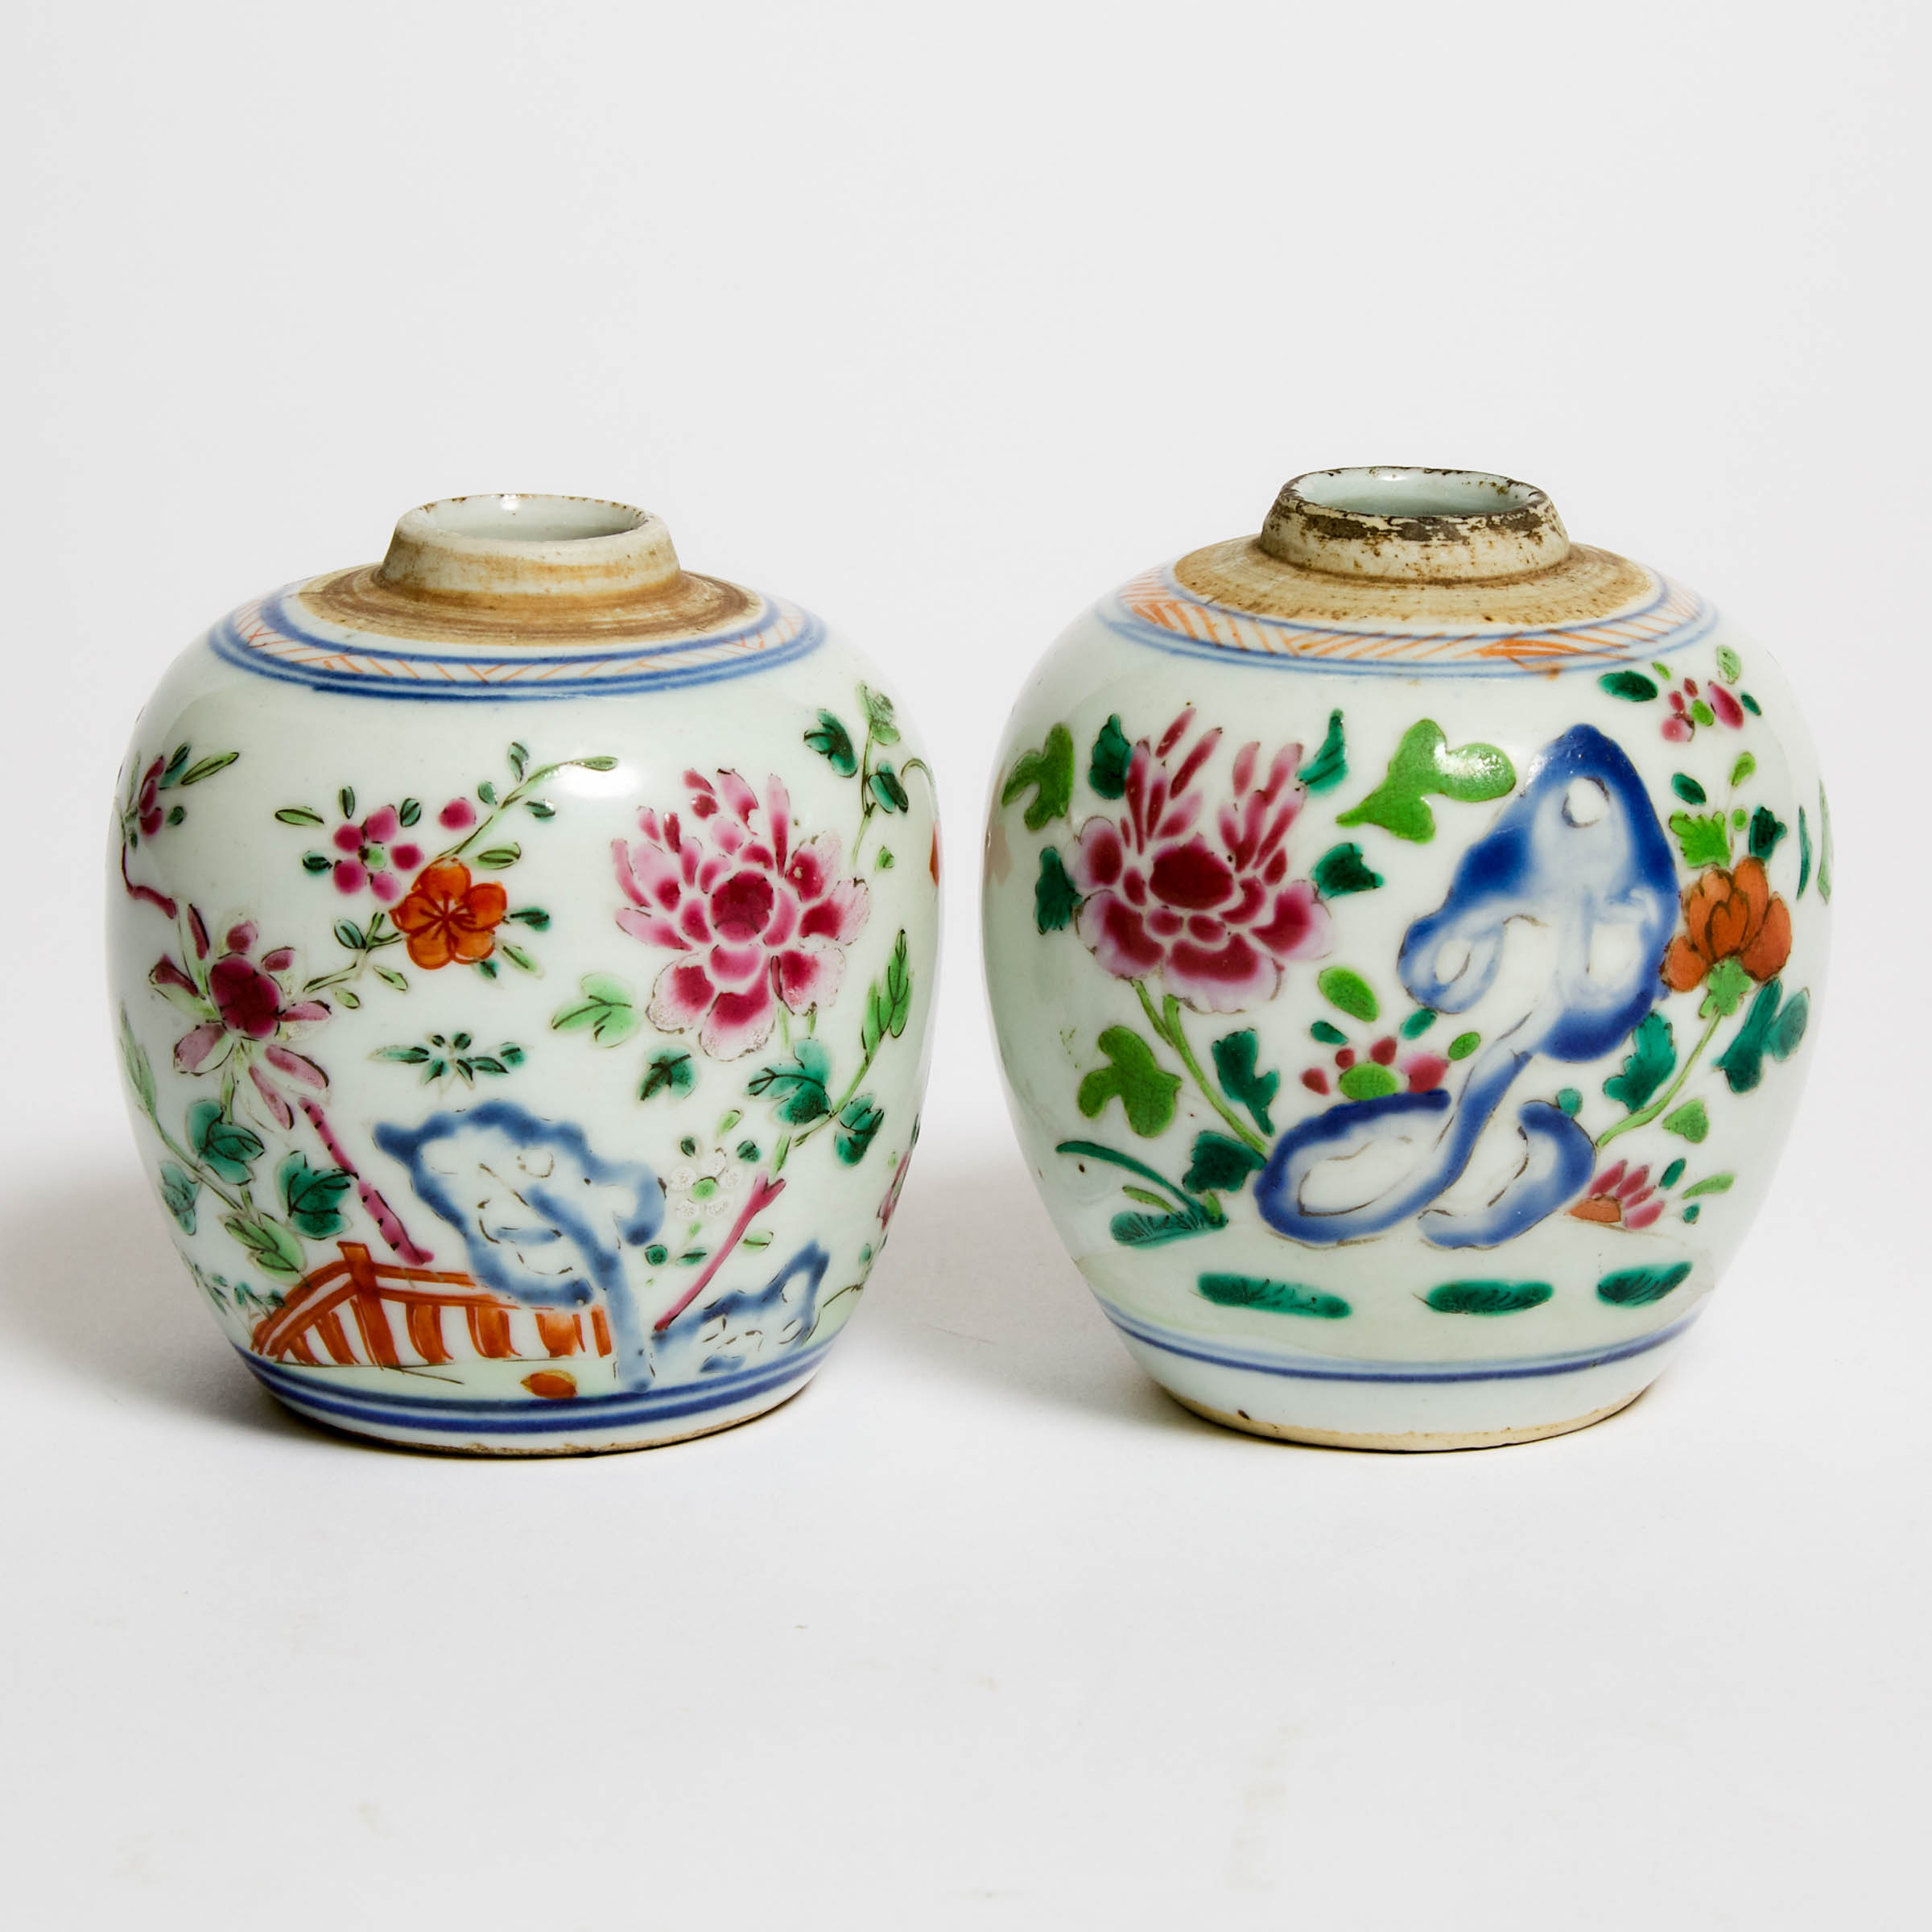 A Pair of Miniature Famille Rose 'Floral' Ginger Jars, 18th Century